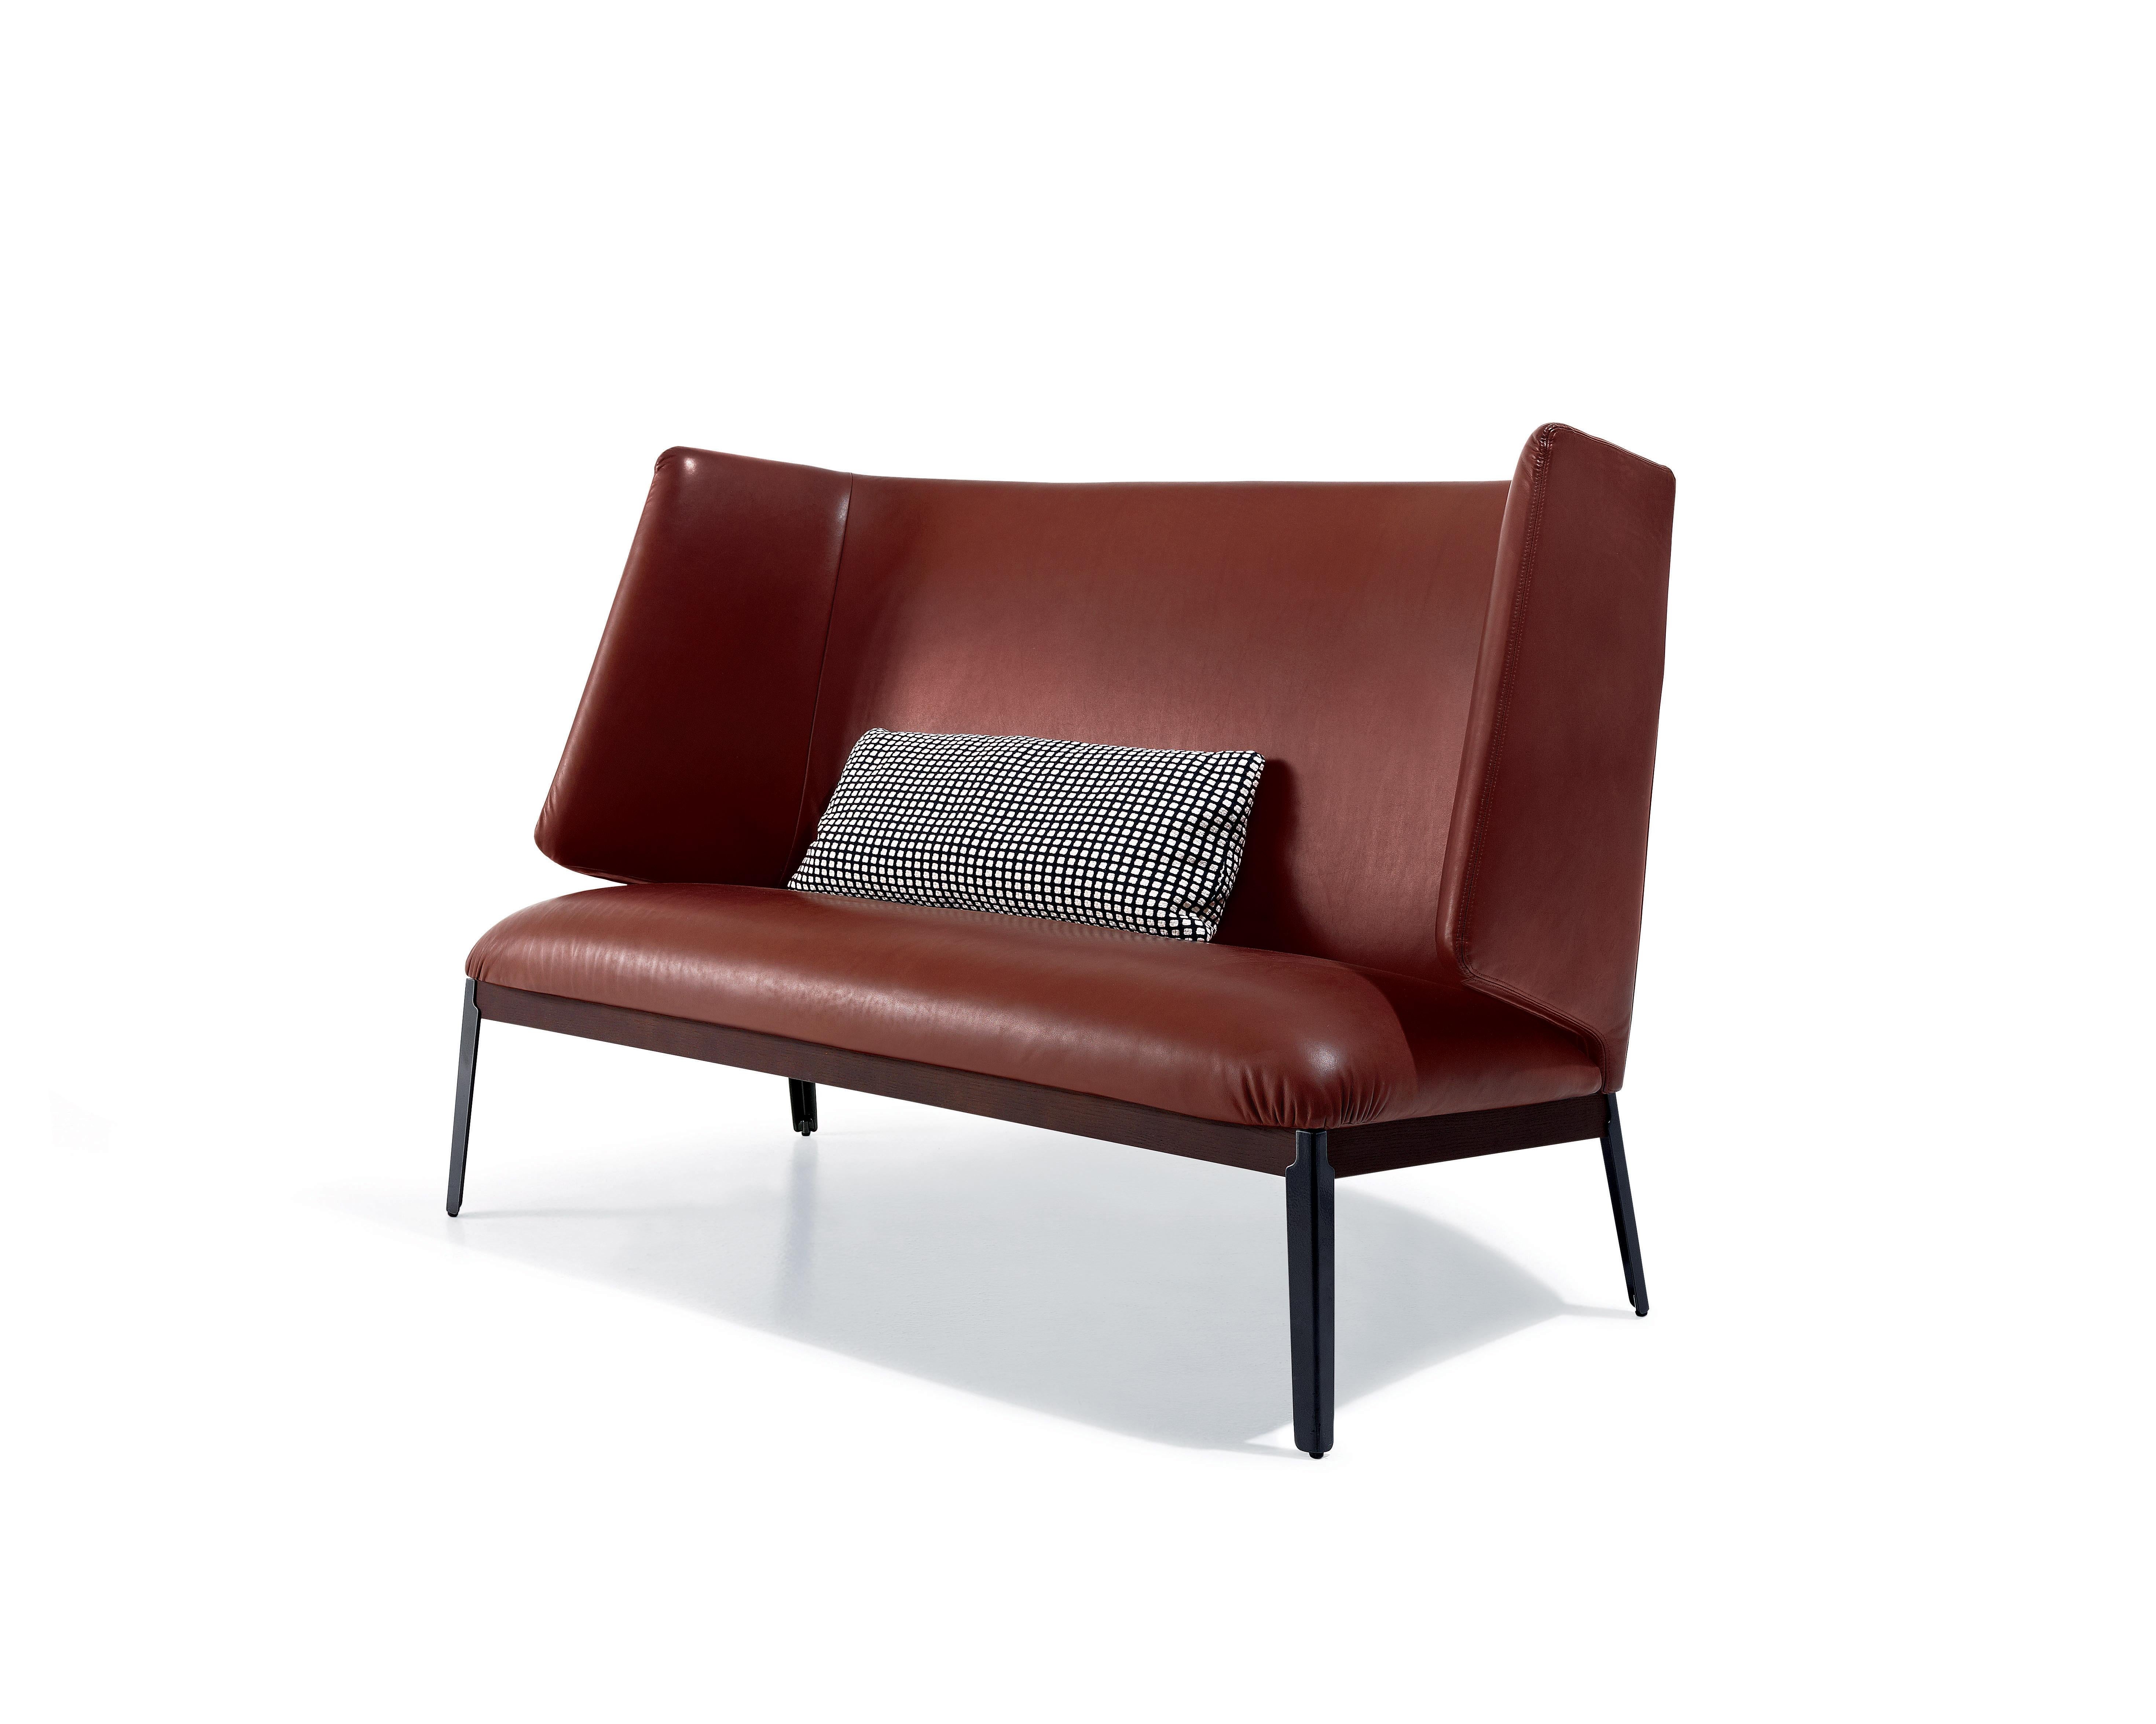 “Arflex has had the audacity and the farsightedness, in the course of the years, to cooperate with some of the greatest and prize-awarded architects and designers. Some icons are still in Arflex collection. The armchair HUG is our answer for a new